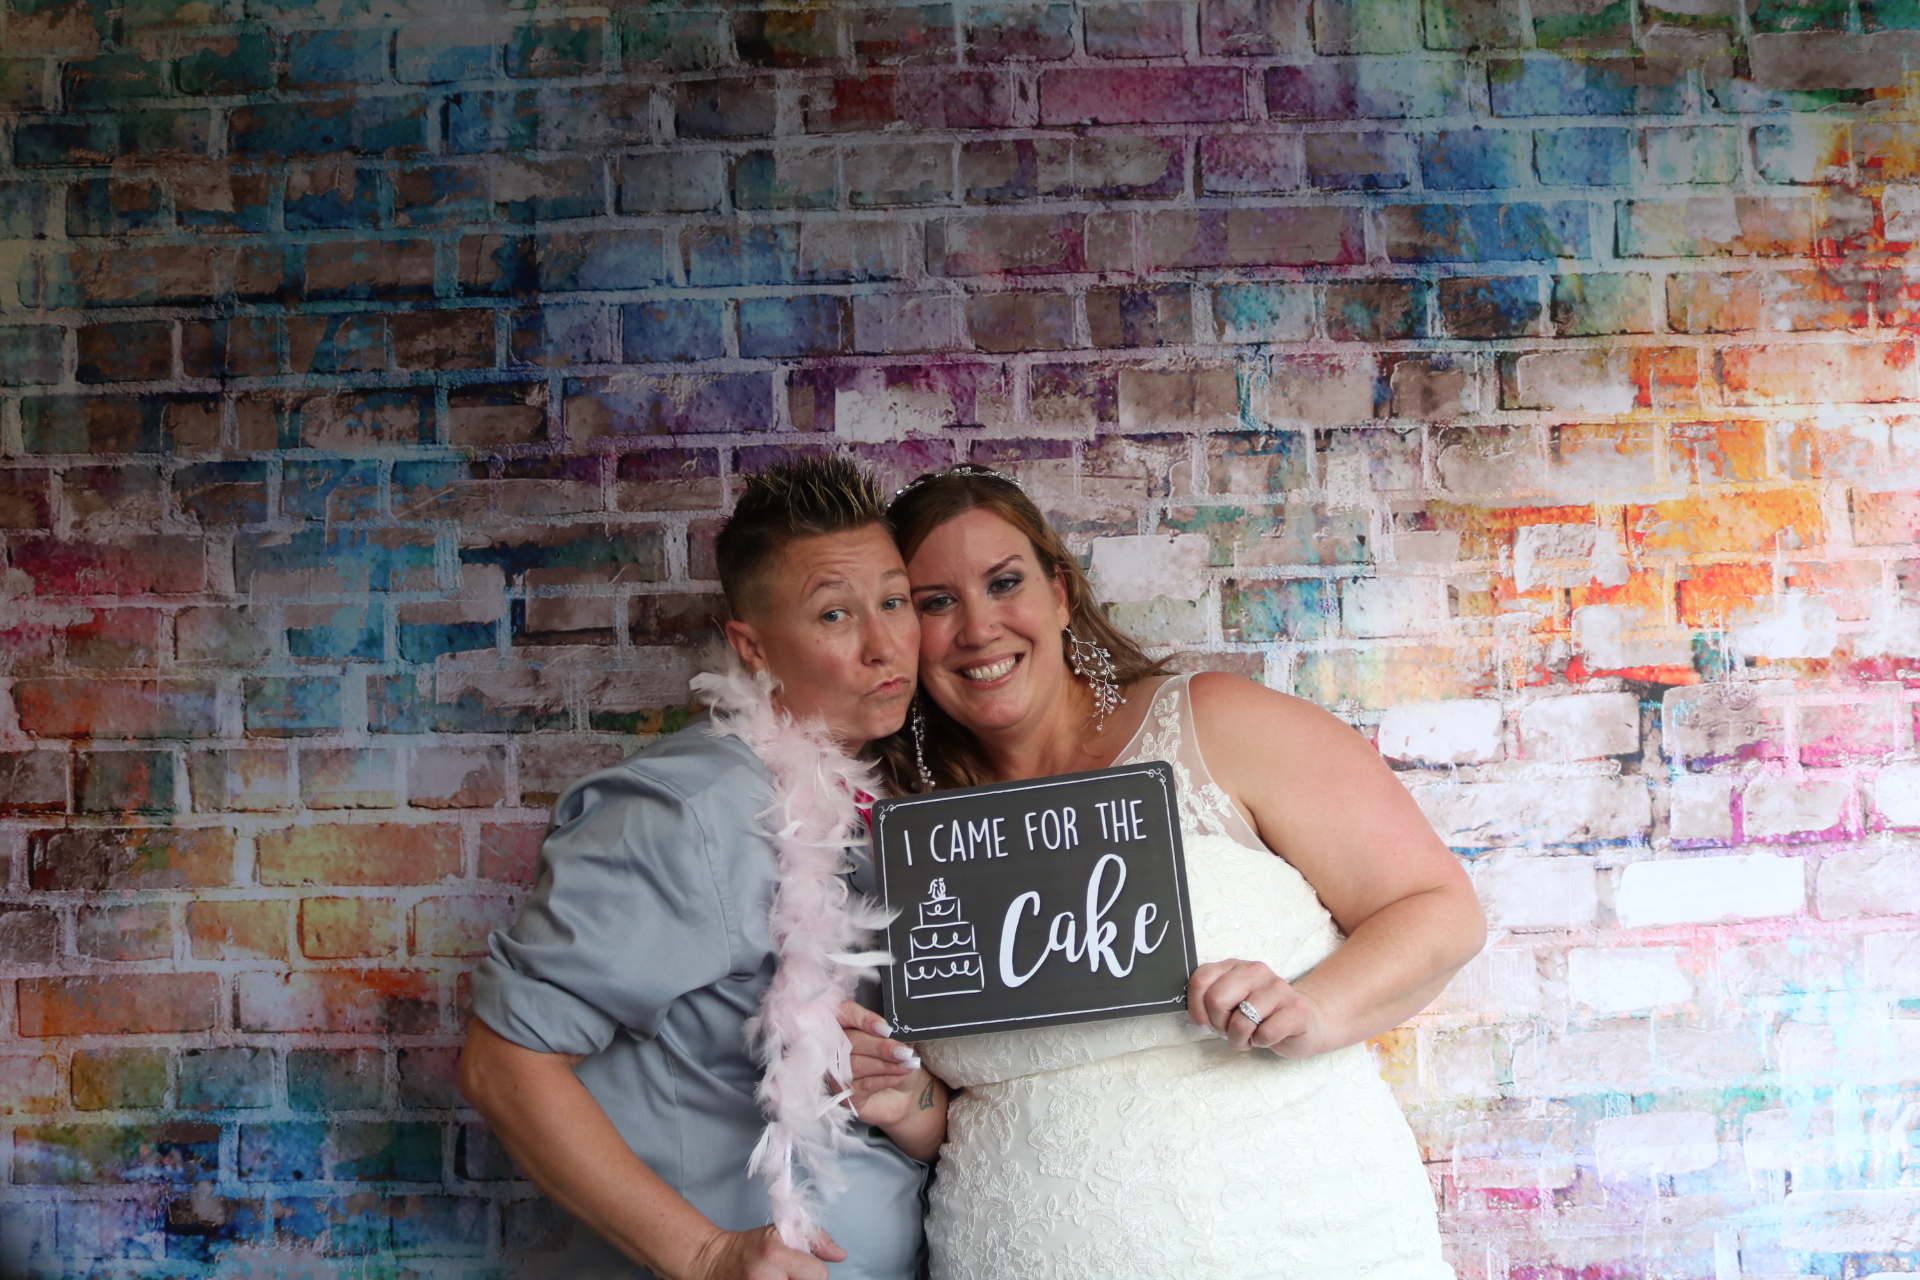 utah wedding photo booth with a colorful brick wall